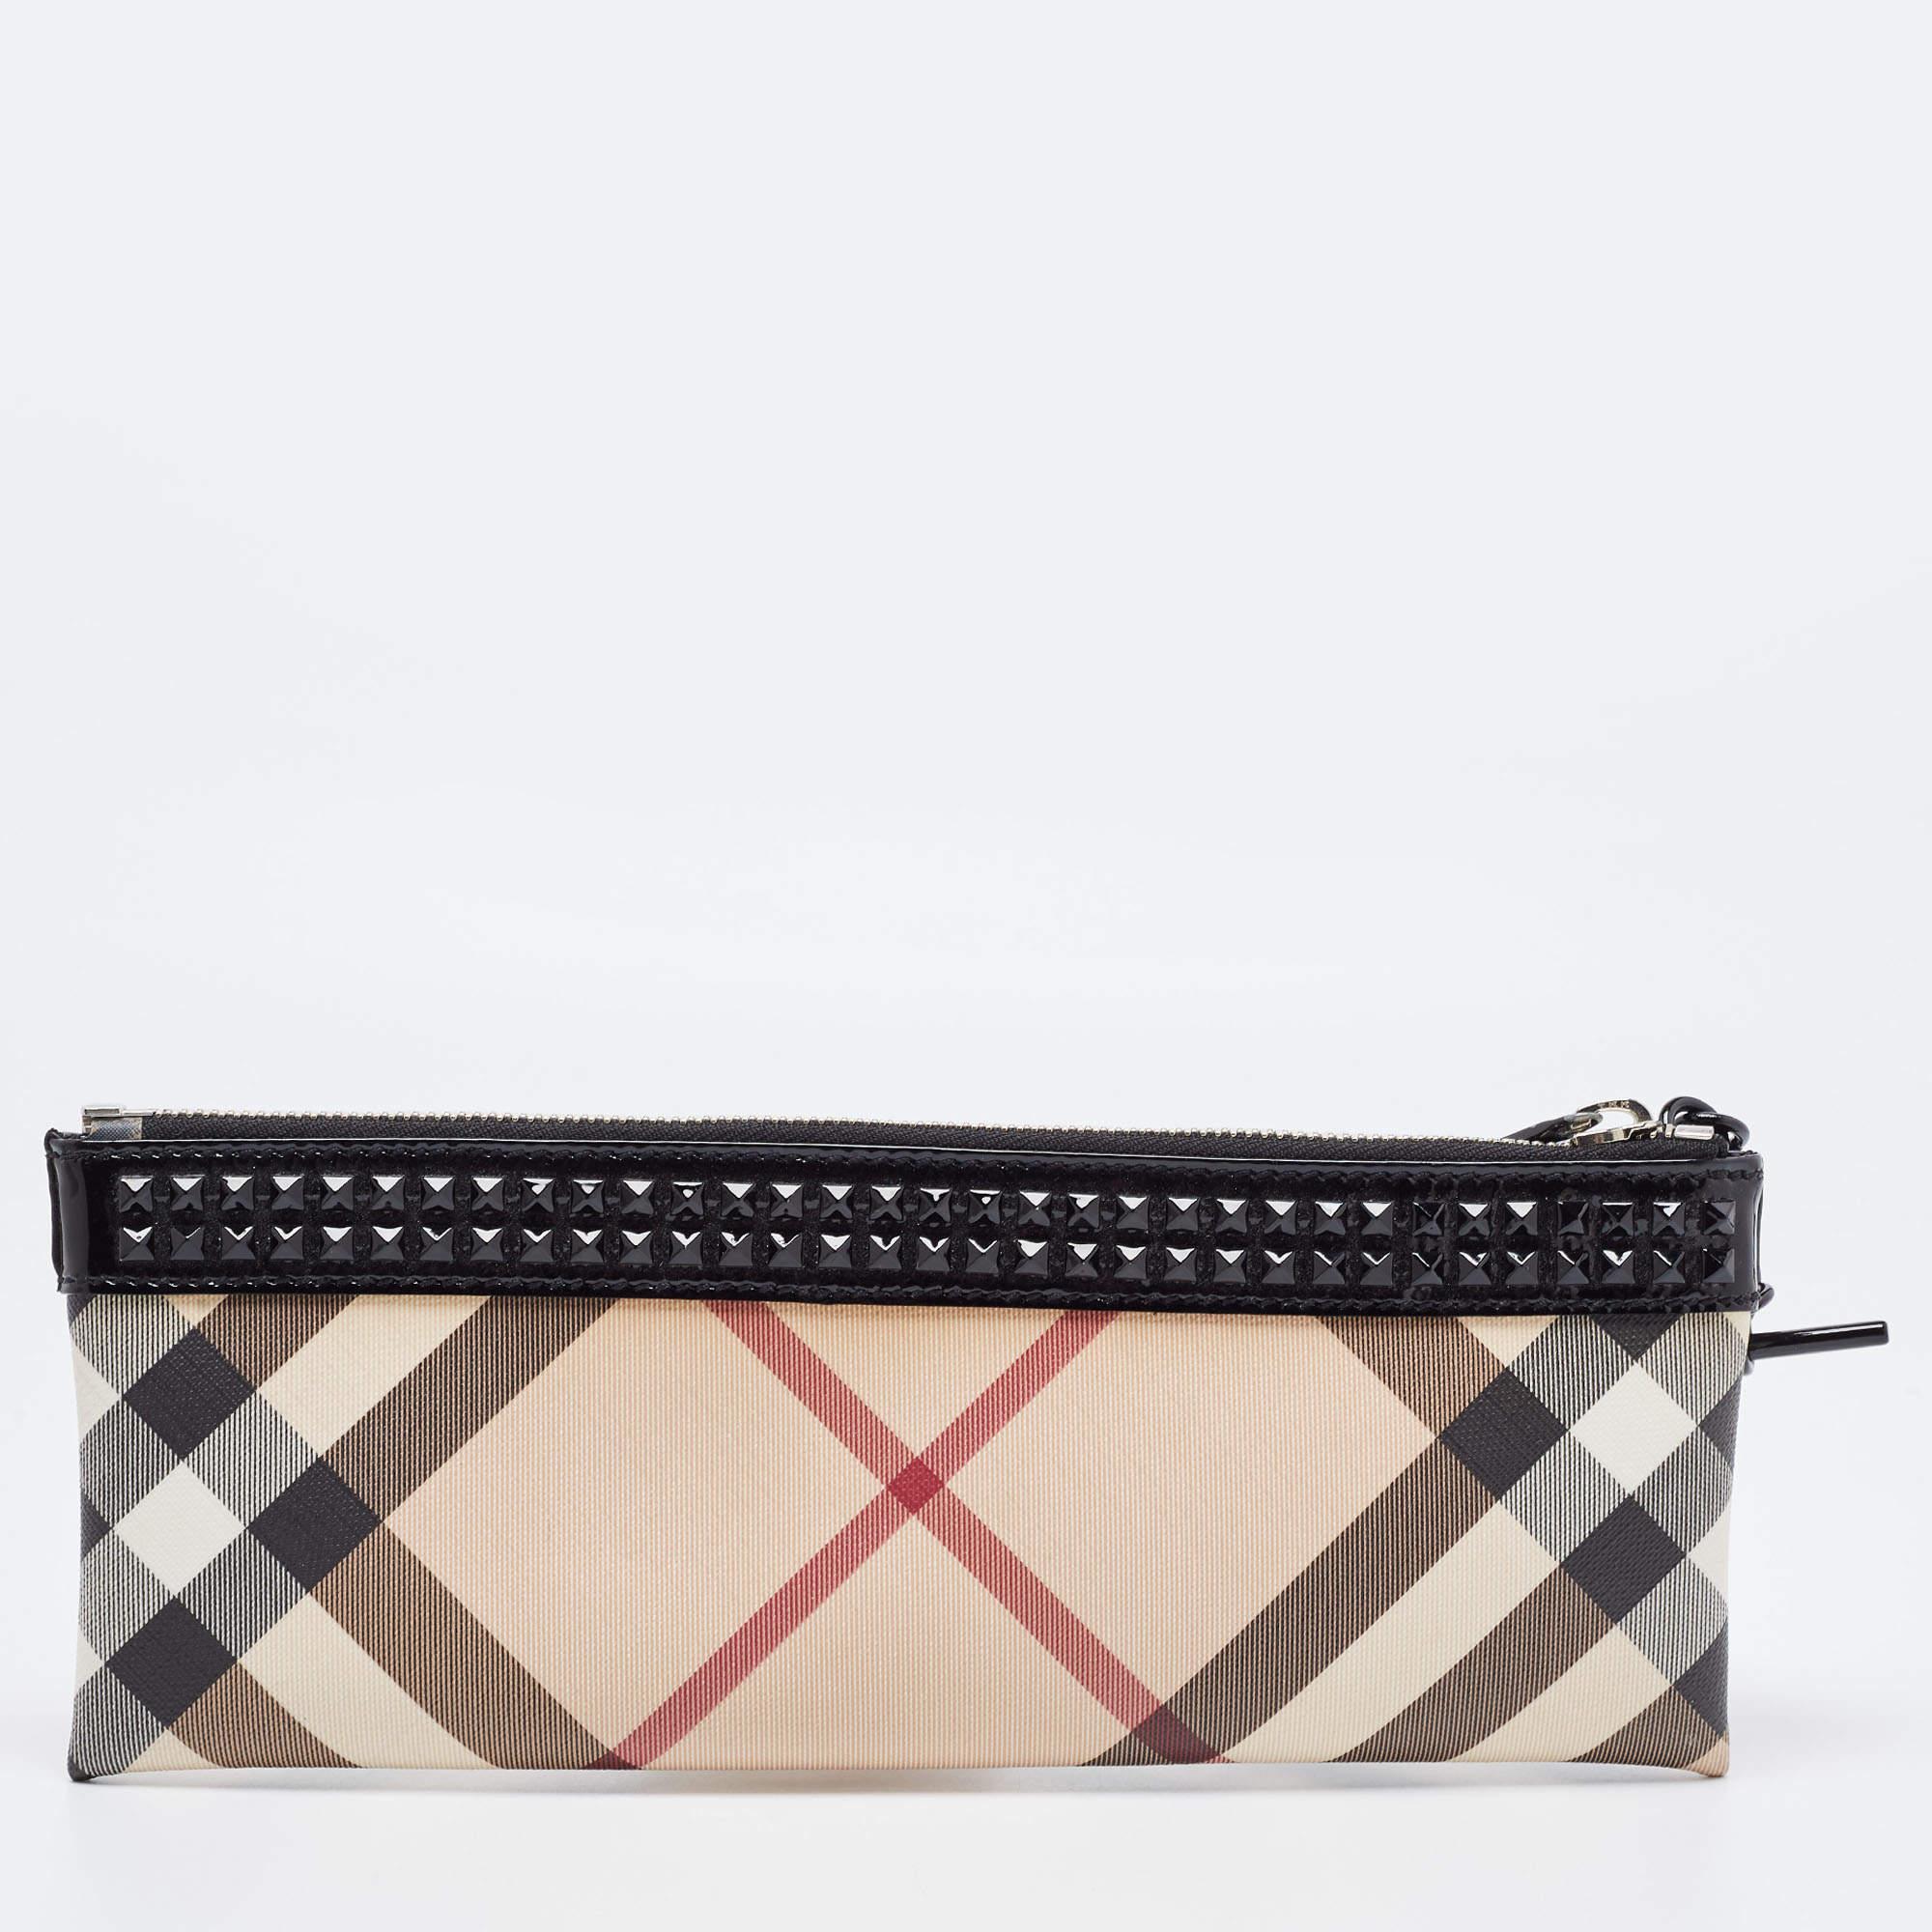 Have all eyes on you when you flaunt this stunner of a clutch by Burberry. Crafted from PVC and patent leather, it carries the signature Nova check on the exterior. The clutch is equipped with a wrist strap and an interior that will hold all your